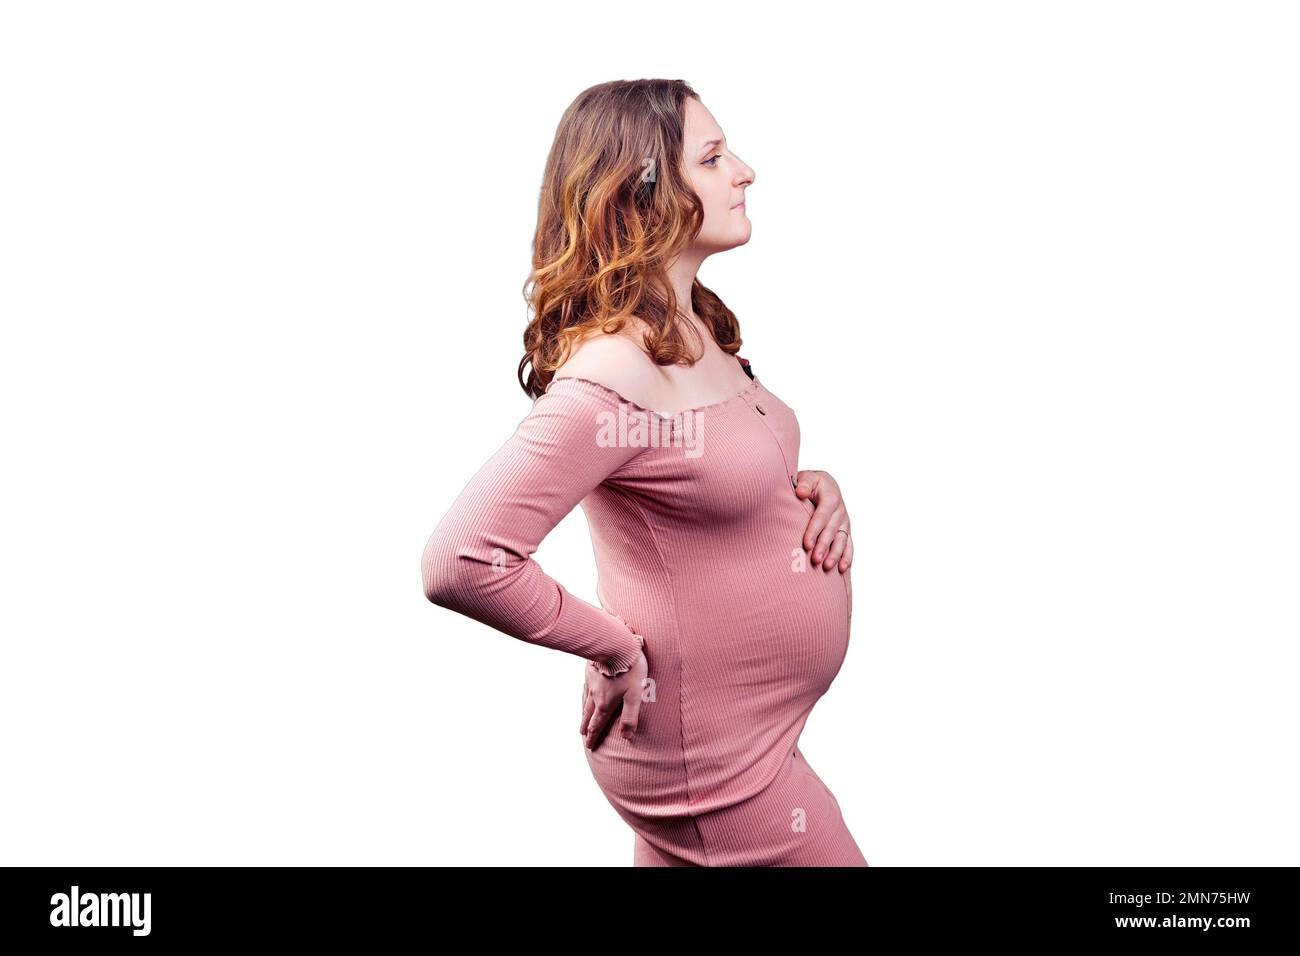 Portrait of an adult pregnant woman in profile, isolated on a white background. 35 year old woman with long curly hair in pink bodycon dress Stock Photo